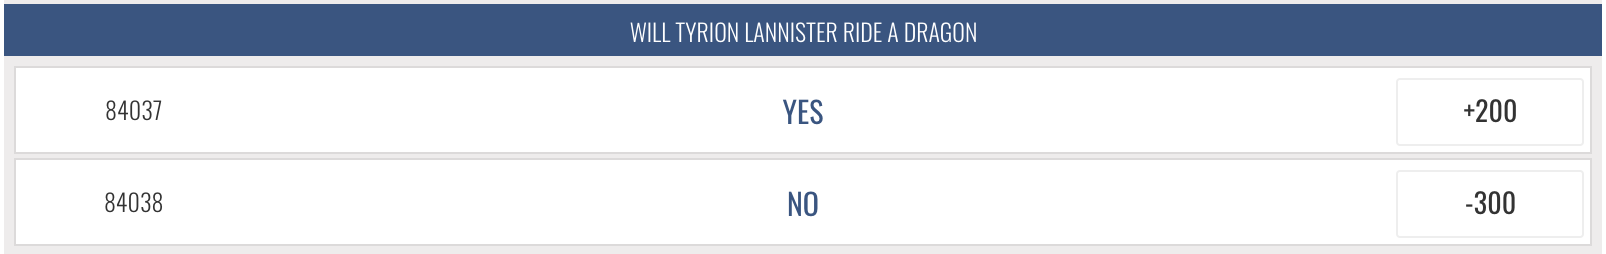 Will Tyrion Lannister ride the dragon betting odds